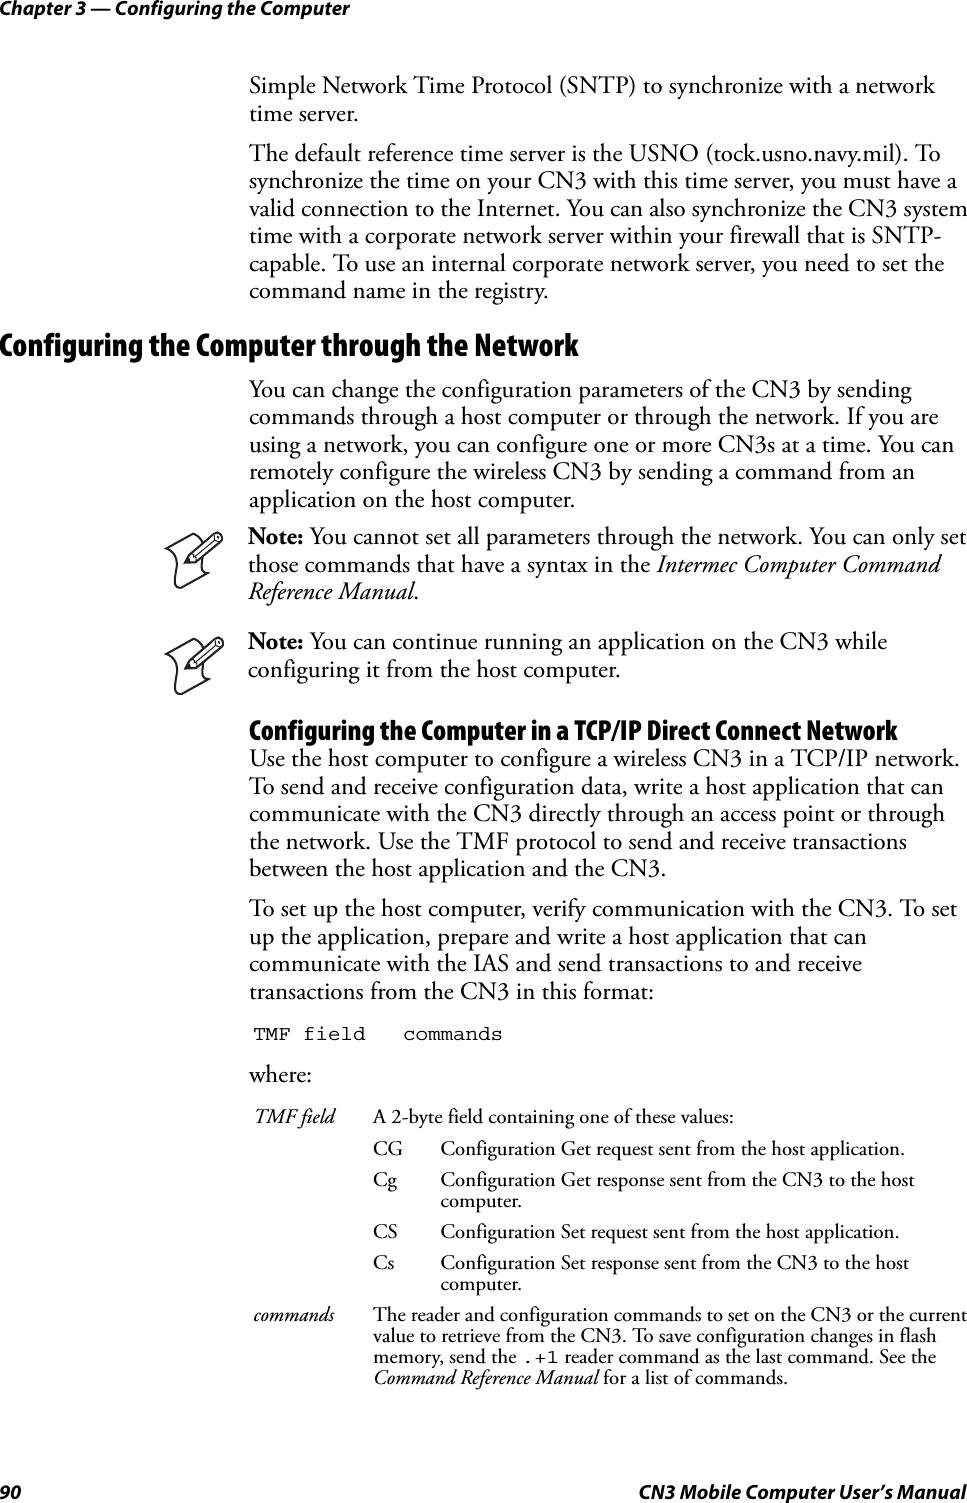 Chapter 3 — Configuring the Computer90 CN3 Mobile Computer User’s ManualSimple Network Time Protocol (SNTP) to synchronize with a network time server.The default reference time server is the USNO (tock.usno.navy.mil). To synchronize the time on your CN3 with this time server, you must have a valid connection to the Internet. You can also synchronize the CN3 system time with a corporate network server within your firewall that is SNTP-capable. To use an internal corporate network server, you need to set the command name in the registry.Configuring the Computer through the NetworkYou can change the configuration parameters of the CN3 by sending commands through a host computer or through the network. If you are using a network, you can configure one or more CN3s at a time. You can remotely configure the wireless CN3 by sending a command from an application on the host computer.Configuring the Computer in a TCP/IP Direct Connect NetworkUse the host computer to configure a wireless CN3 in a TCP/IP network. To send and receive configuration data, write a host application that can communicate with the CN3 directly through an access point or through the network. Use the TMF protocol to send and receive transactions between the host application and the CN3.To set up the host computer, verify communication with the CN3. To set up the application, prepare and write a host application that can communicate with the IAS and send transactions to and receive transactions from the CN3 in this format:where:Note: You cannot set all parameters through the network. You can only set those commands that have a syntax in the Intermec Computer Command Reference Manual.Note: You can continue running an application on the CN3 while configuring it from the host computer.TMF field commandsTMF field A 2-byte field containing one of these values:CG Configuration Get request sent from the host application.Cg Configuration Get response sent from the CN3 to the host computer.CS Configuration Set request sent from the host application.Cs Configuration Set response sent from the CN3 to the host computer.commands The reader and configuration commands to set on the CN3 or the current value to retrieve from the CN3. To save configuration changes in flash memory, send the .+1 reader command as the last command. See the Command Reference Manual for a list of commands.